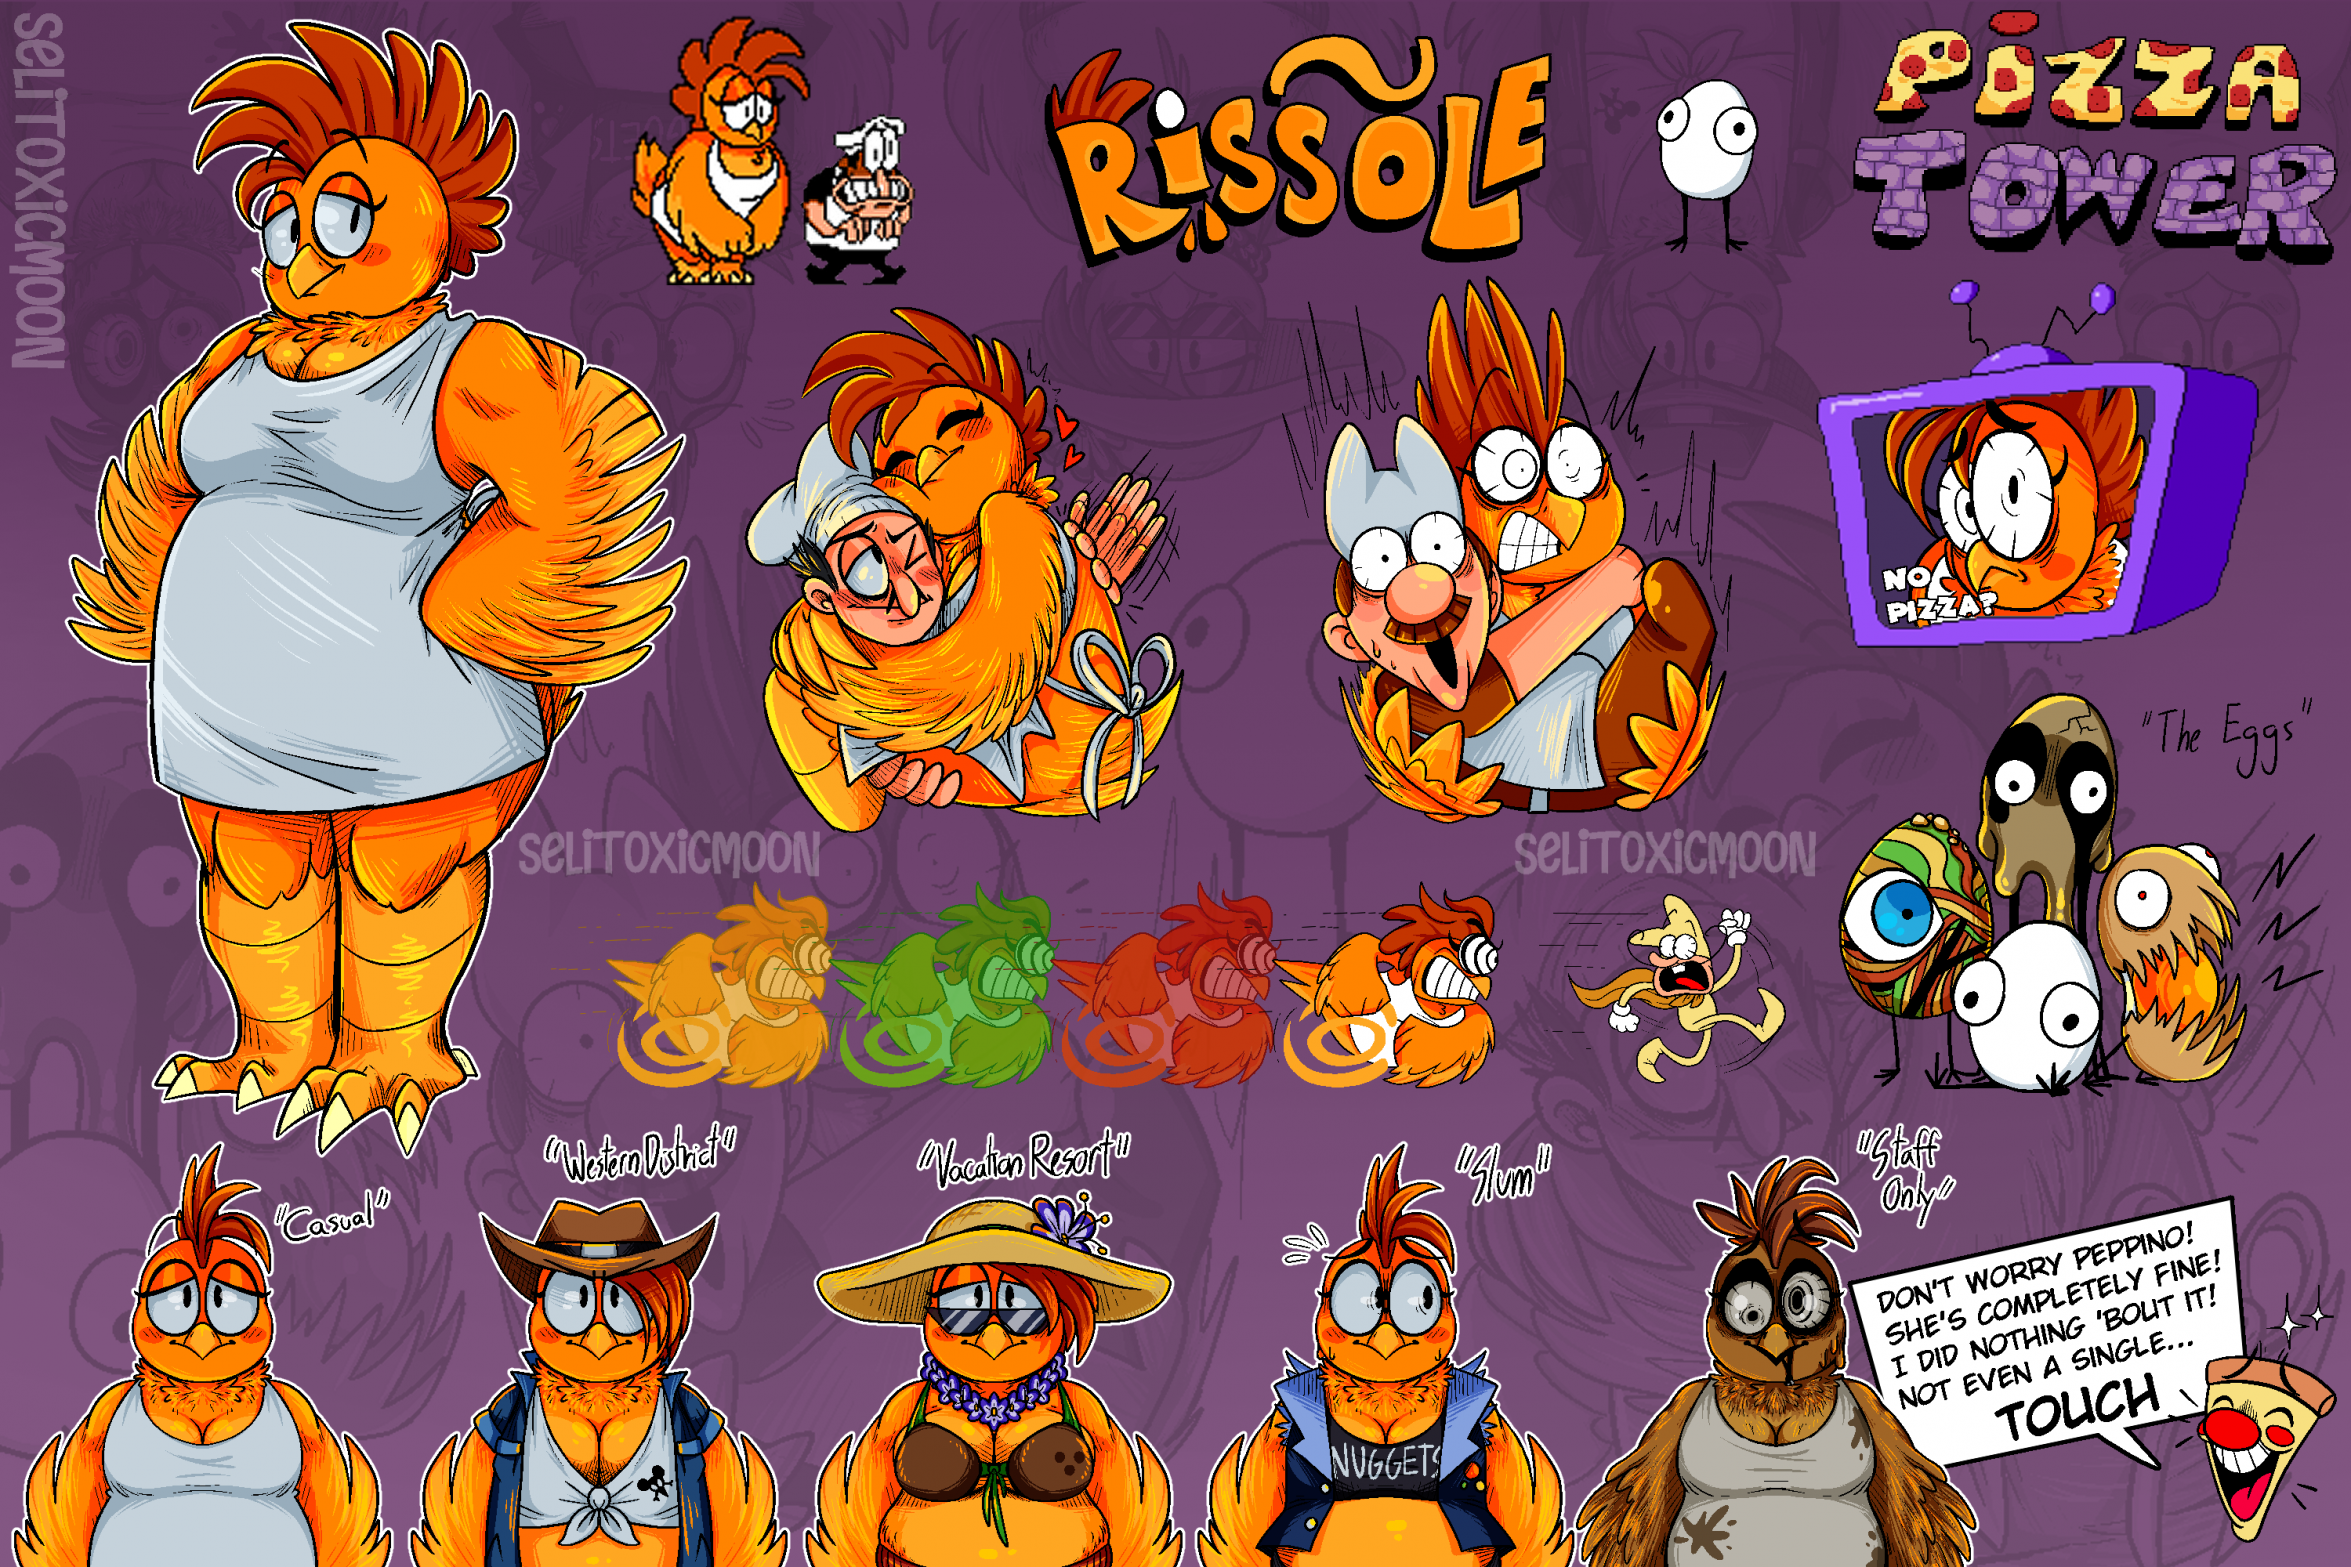 PIZZA TOWER] Rissole Character Sheet by SeliDevilfeather -- Fur